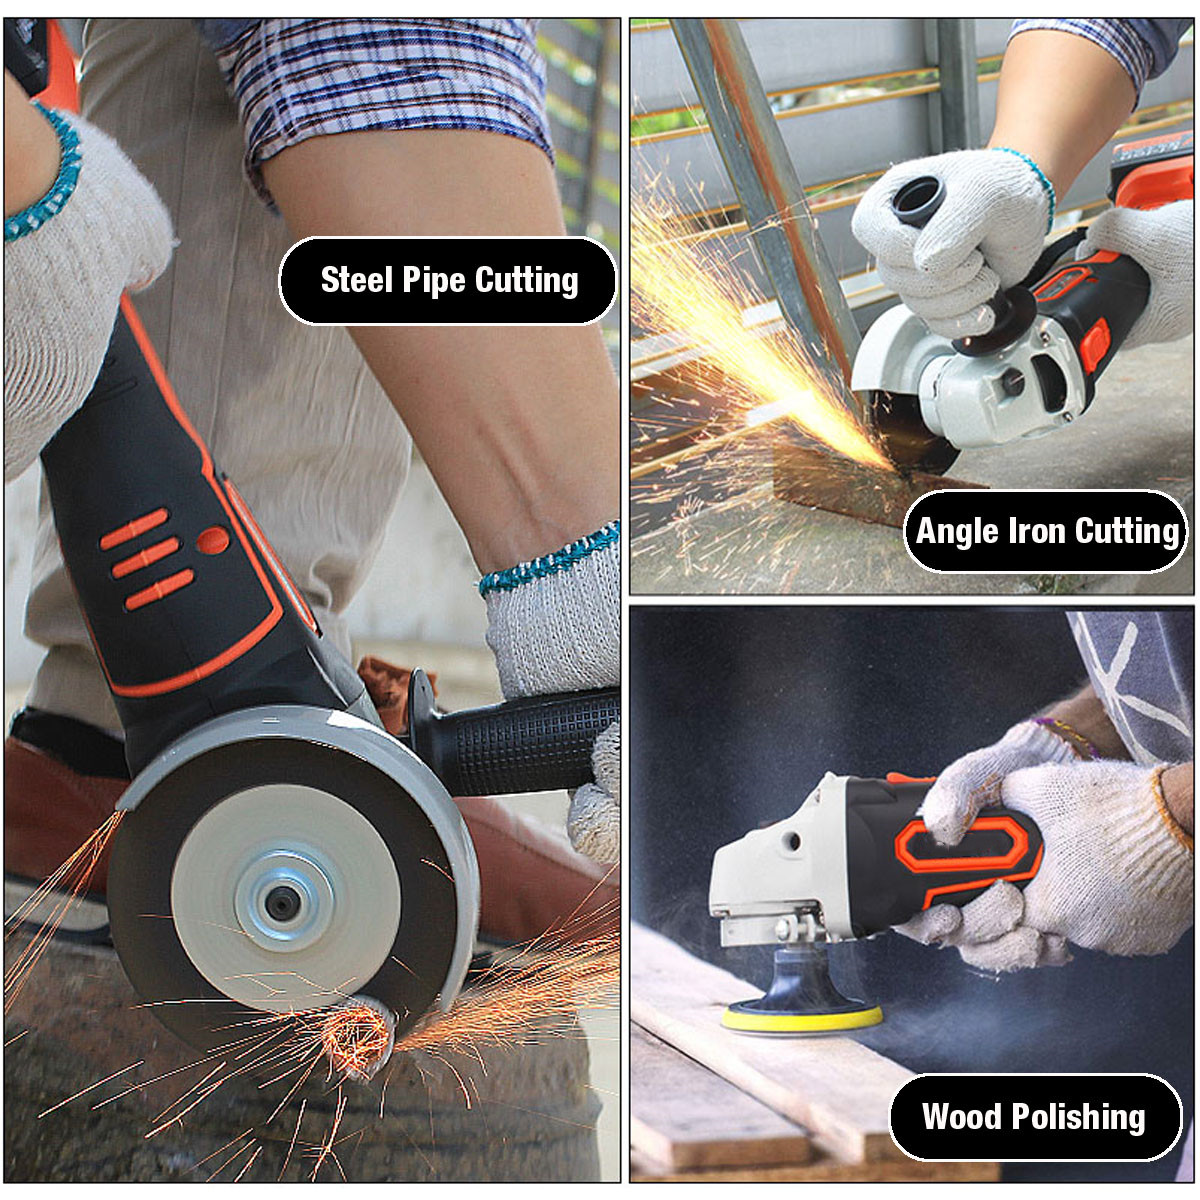 128VF-1300W-10000RPM-Cordless-Brushless-Angle-Grinder-with-16800mAh-Li-Ion-Battery-1520444-9